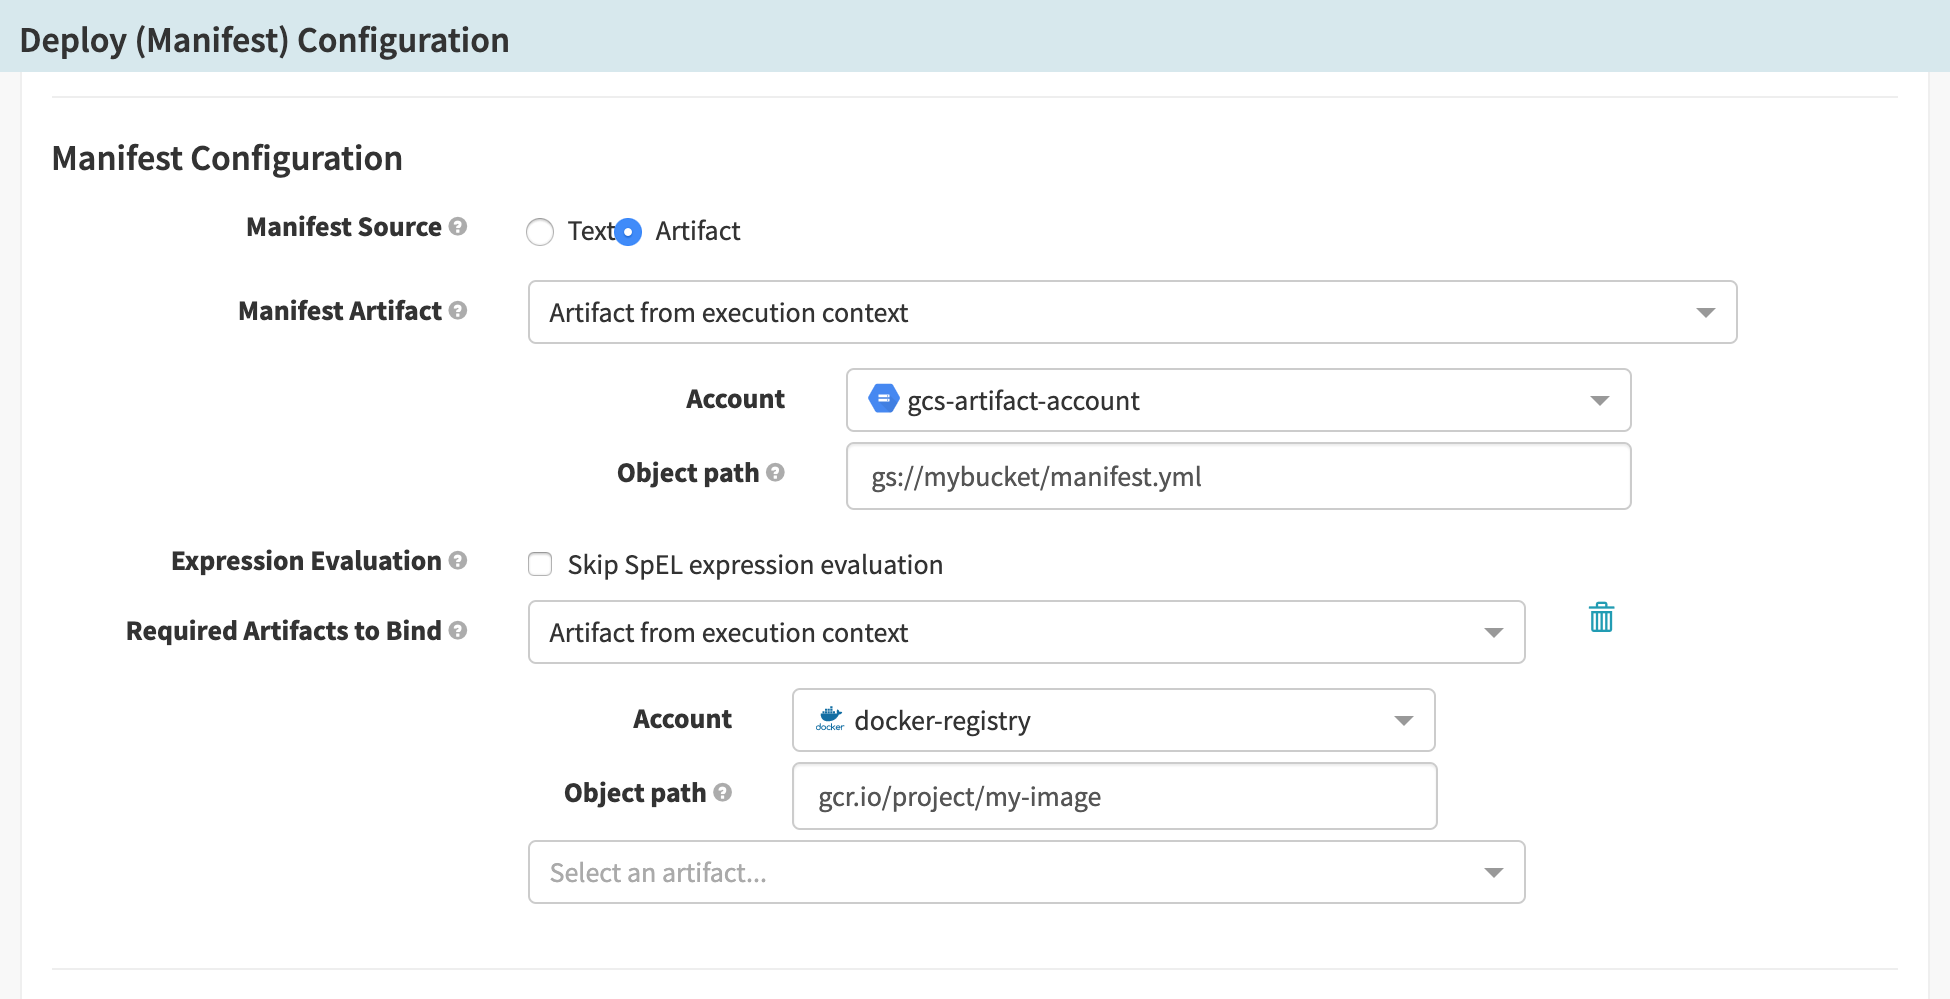 Configuring a Deploy (Manifest) stage to use a Docker image as a required artifact.